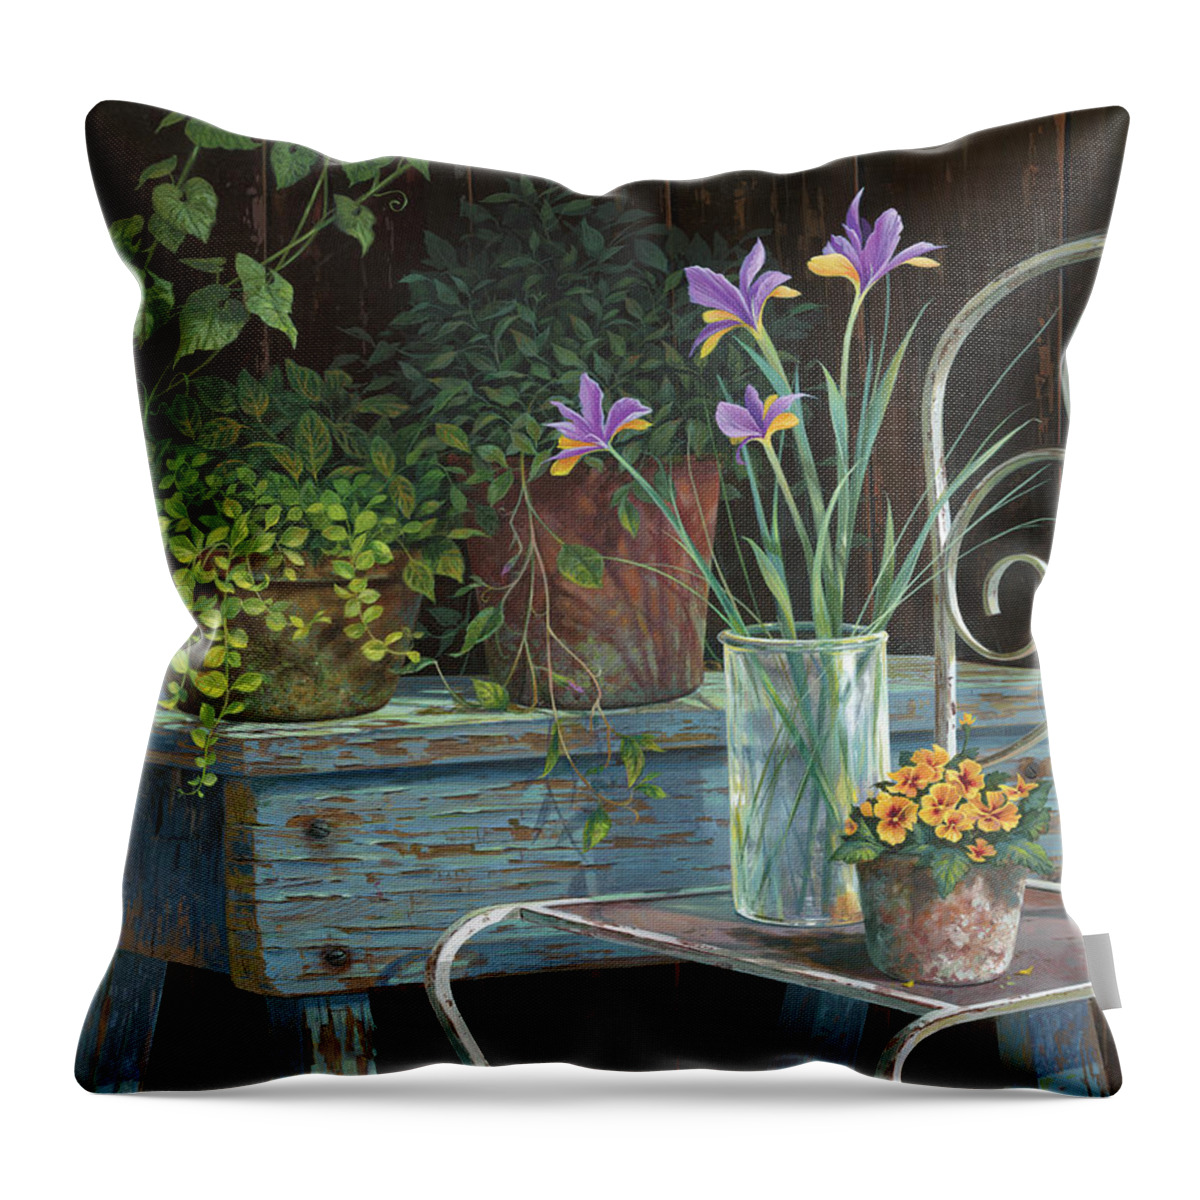 Michael Humphries Throw Pillow featuring the painting Irises by Michael Humphries